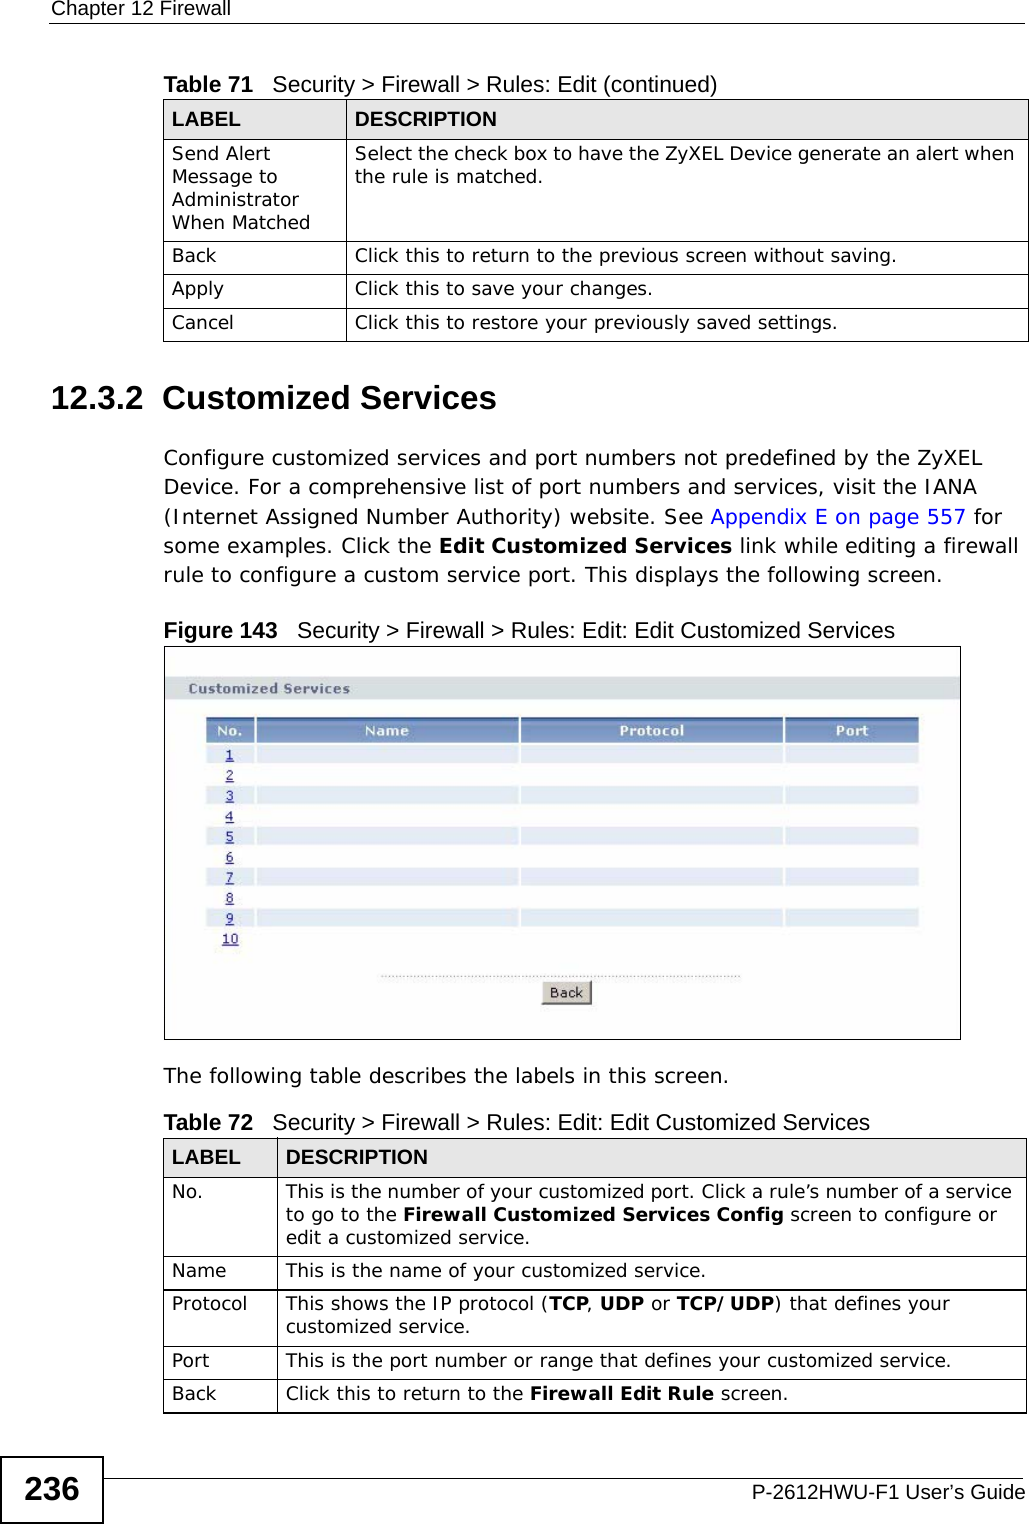 Chapter 12 FirewallP-2612HWU-F1 User’s Guide23612.3.2  Customized Services Configure customized services and port numbers not predefined by the ZyXEL Device. For a comprehensive list of port numbers and services, visit the IANA (Internet Assigned Number Authority) website. See Appendix E on page 557 for some examples. Click the Edit Customized Services link while editing a firewall rule to configure a custom service port. This displays the following screen.Figure 143   Security &gt; Firewall &gt; Rules: Edit: Edit Customized ServicesThe following table describes the labels in this screen. Send Alert Message to Administrator When MatchedSelect the check box to have the ZyXEL Device generate an alert when the rule is matched.Back Click this to return to the previous screen without saving.Apply Click this to save your changes.Cancel Click this to restore your previously saved settings.Table 71   Security &gt; Firewall &gt; Rules: Edit (continued)LABEL DESCRIPTIONTable 72   Security &gt; Firewall &gt; Rules: Edit: Edit Customized ServicesLABEL DESCRIPTIONNo. This is the number of your customized port. Click a rule’s number of a service to go to the Firewall Customized Services Config screen to configure or edit a customized service.Name This is the name of your customized service.Protocol This shows the IP protocol (TCP, UDP or TCP/UDP) that defines your customized service.Port This is the port number or range that defines your customized service.Back Click this to return to the Firewall Edit Rule screen.